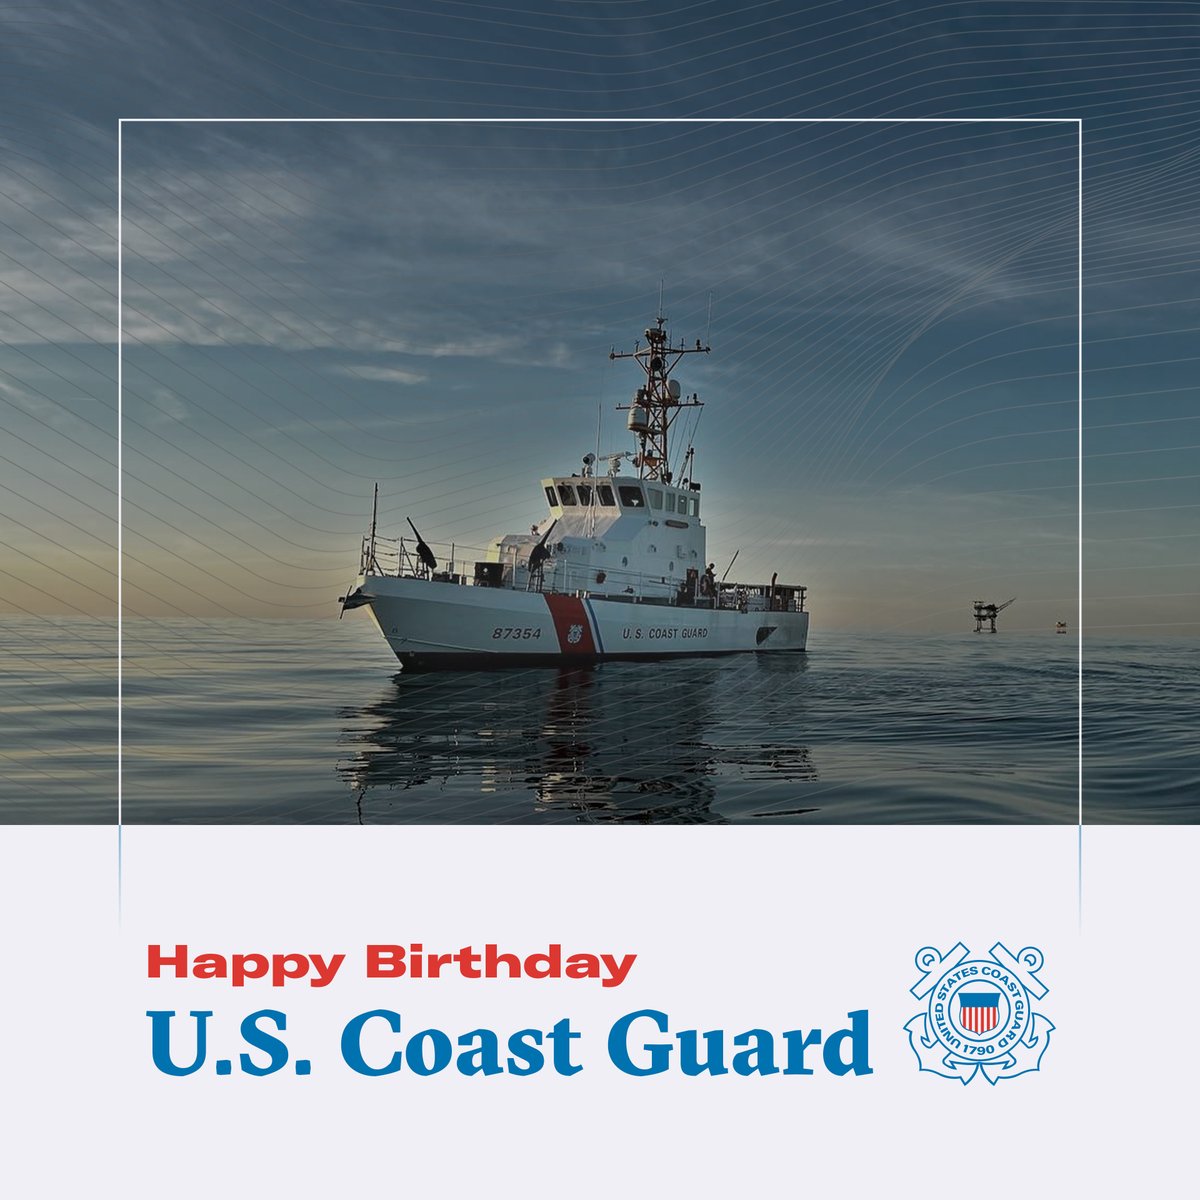 Thank you for your service, @USCG!   #USCG #HappyBirthday